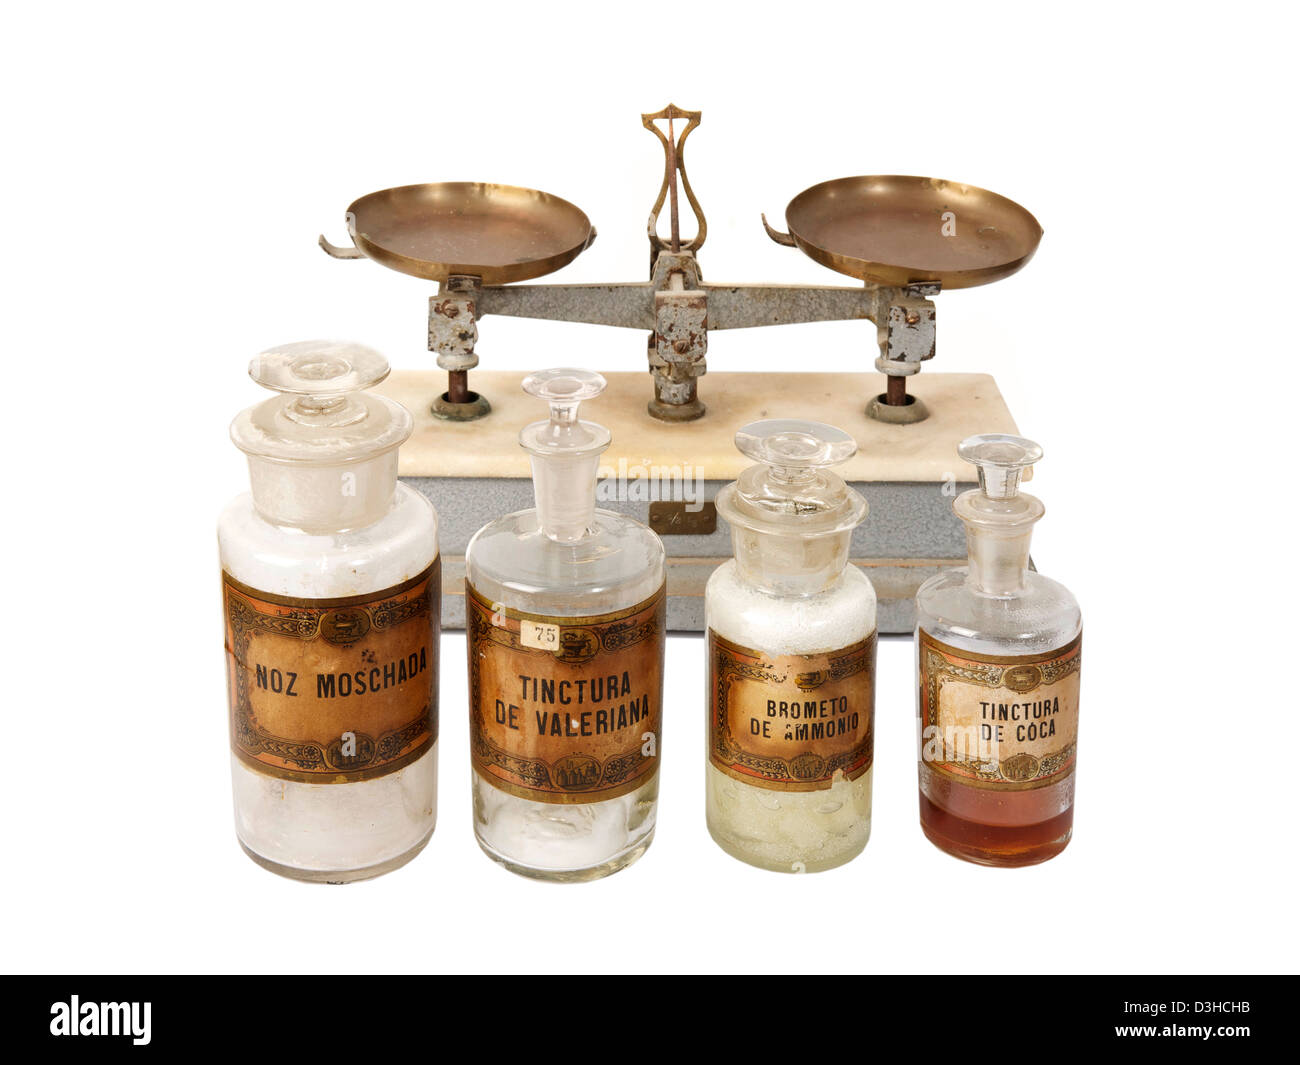 This are true pharmaceutical objects and medicinal drugs used before and after 1900´s year. Stock Photo